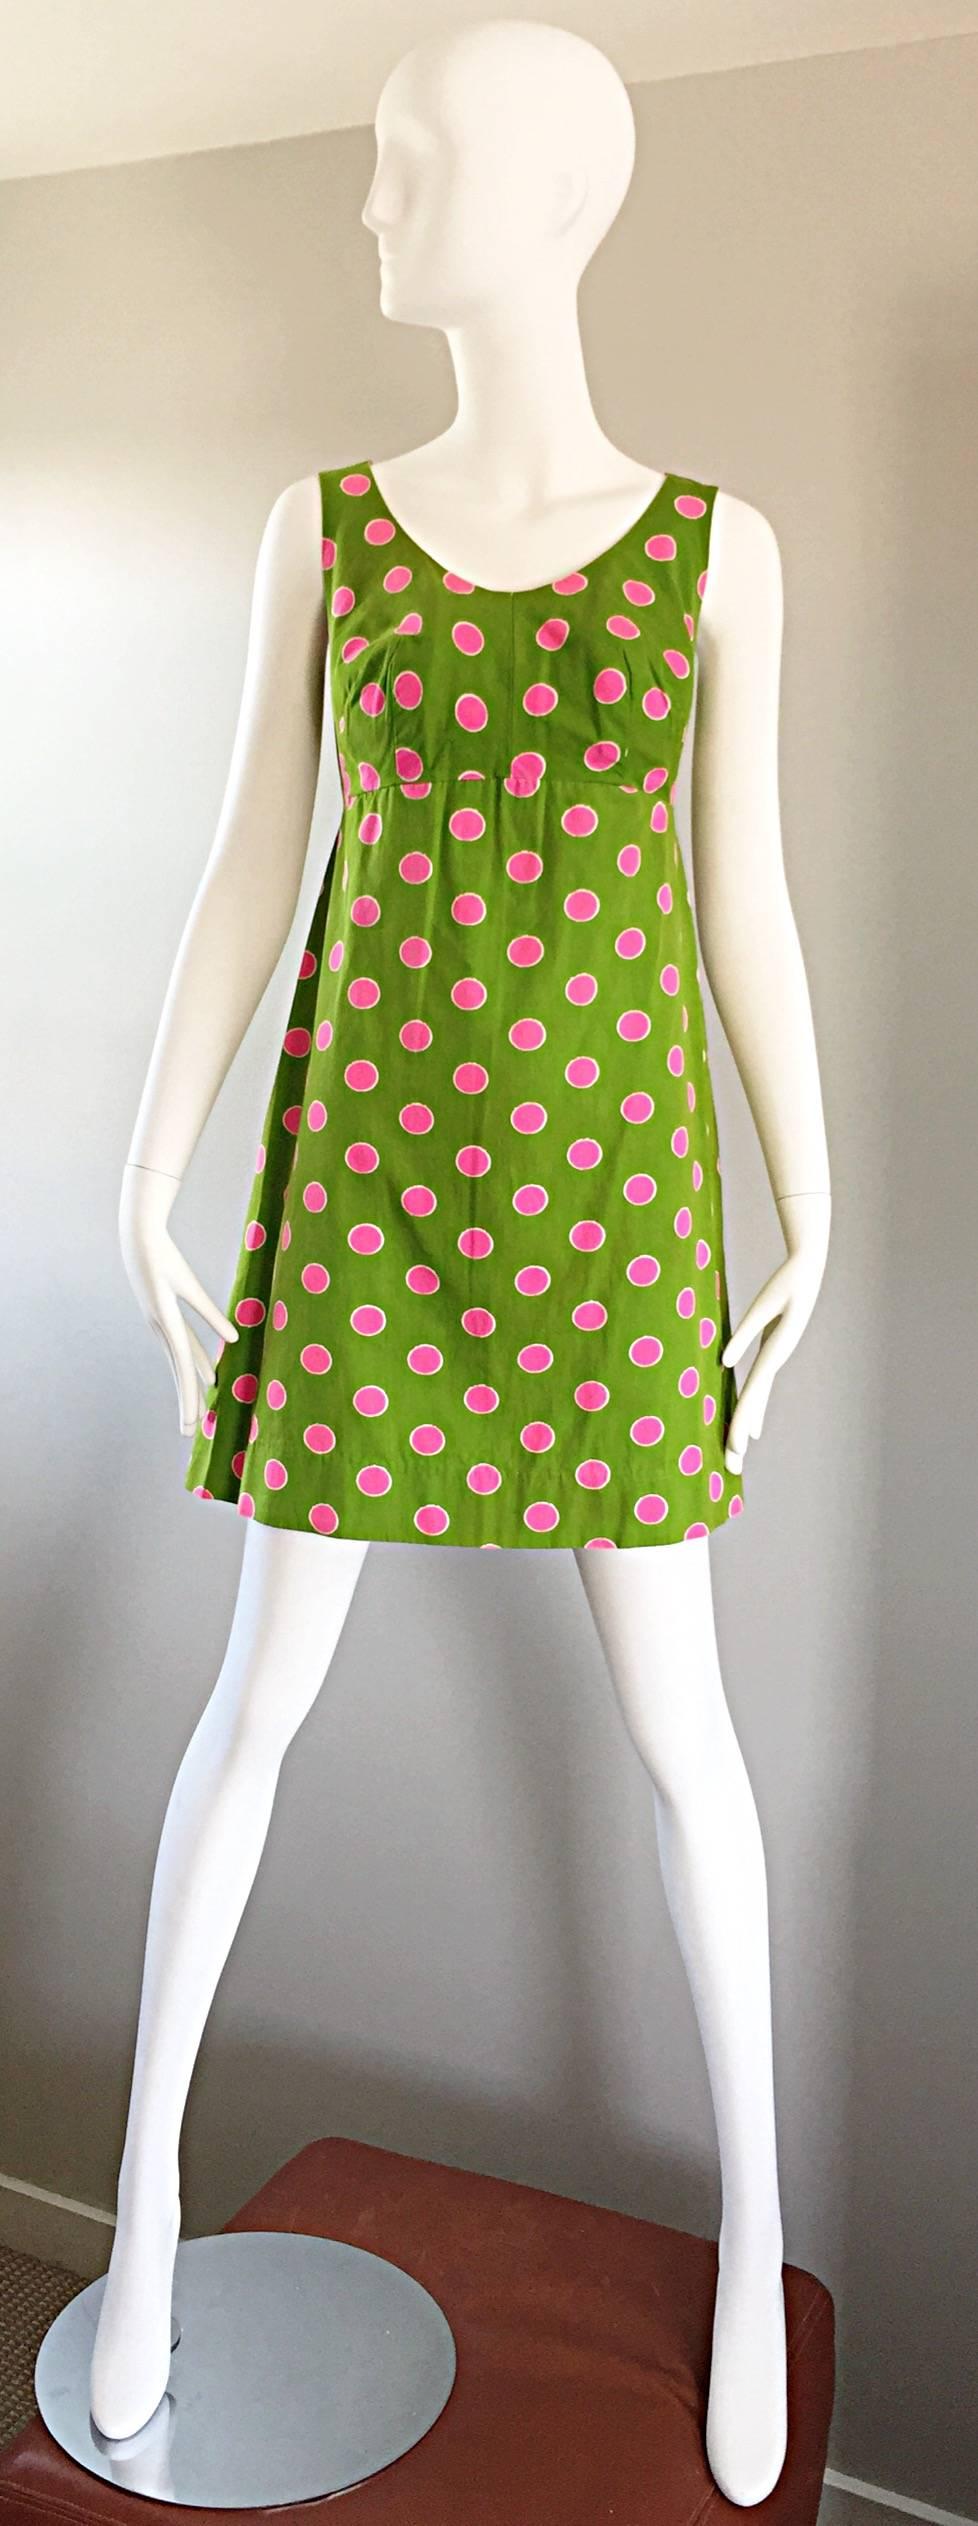 Adorable 1960s Lime Green and Pink Polka Dot Vintage A - Line 60s Cotton Dress In Excellent Condition For Sale In San Diego, CA